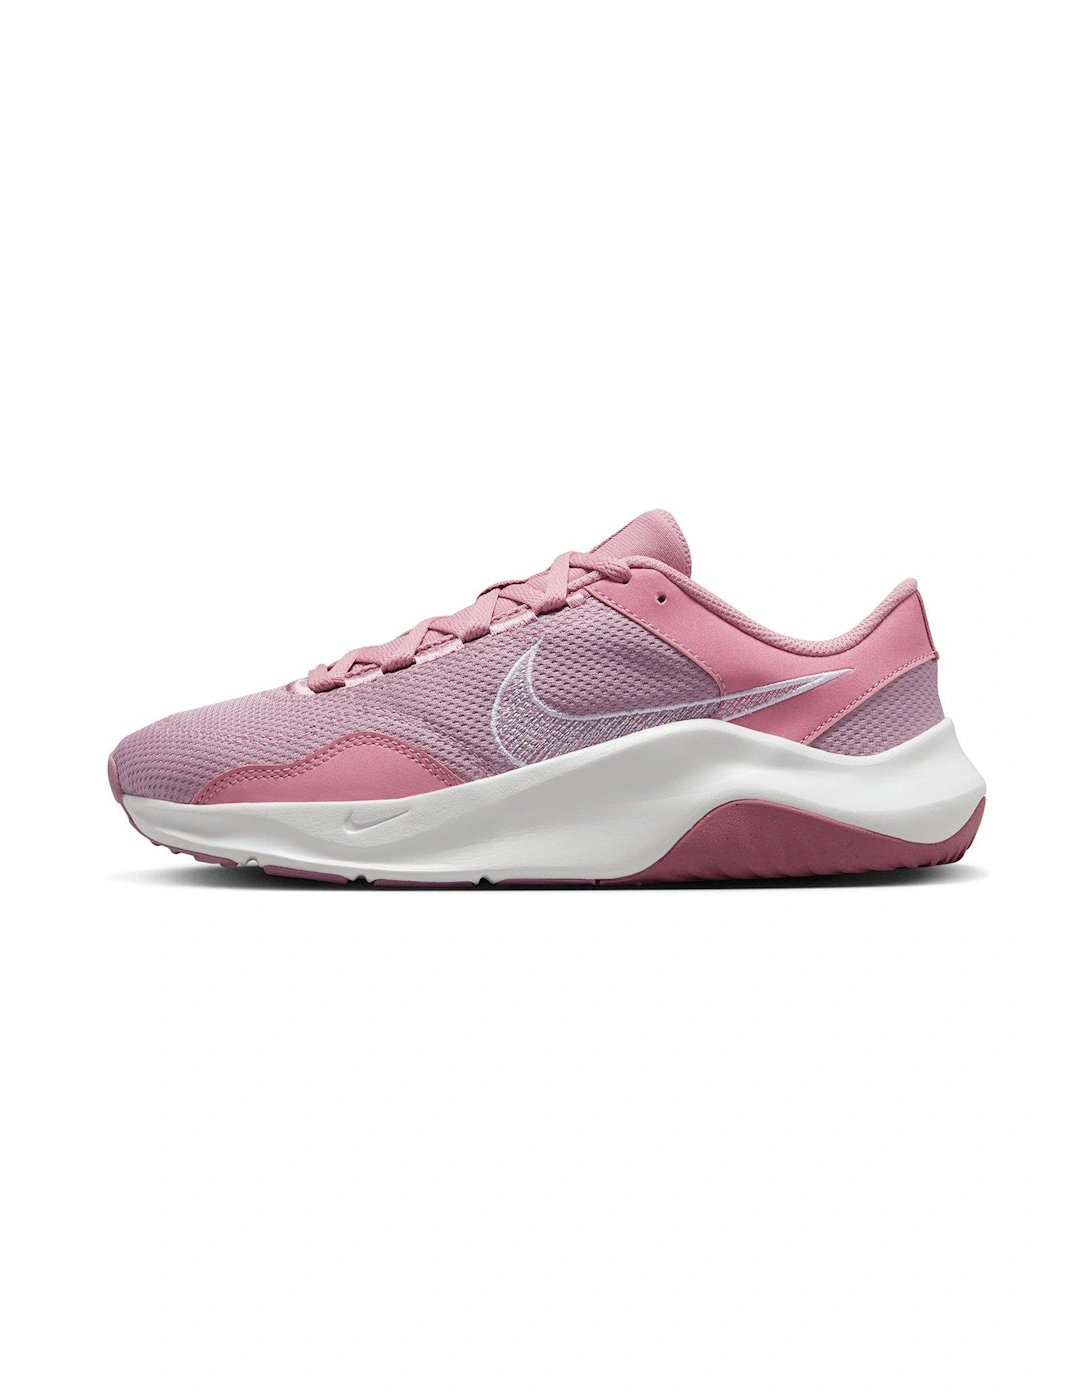 Legend 3 - Pink/White, 3 of 2